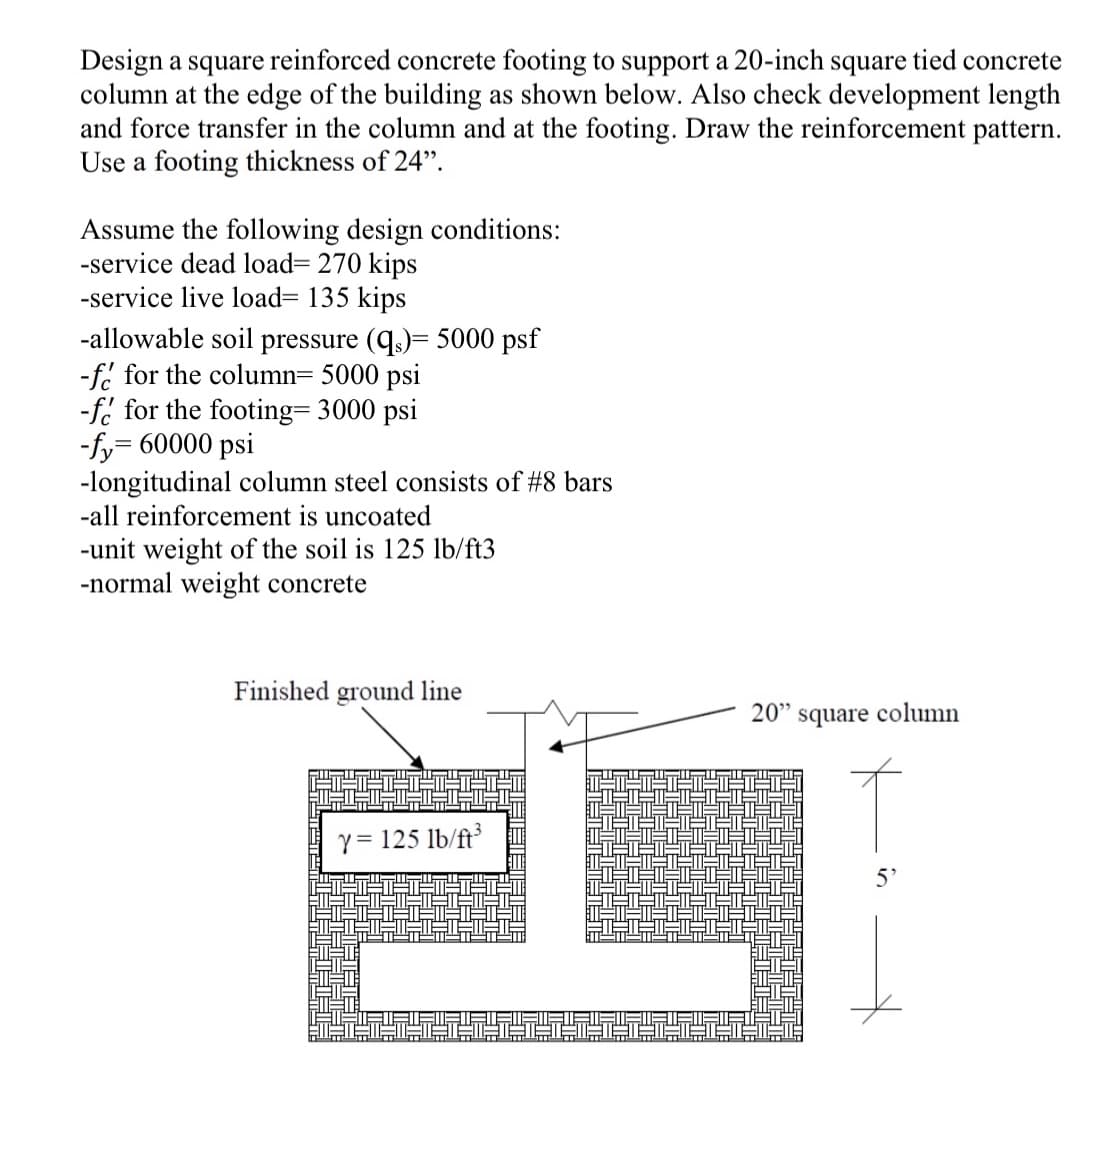 Design a square reinforced concrete footing to support a 20-inch square tied concrete
column at the edge of the building as shown below. Also check development length
and force transfer in the column and at the footing. Draw the reinforcement pattern.
Use a footing thickness of 24".
Assume the following design conditions:
-service dead load= 270 kips
-service live load= 135 kips
-allowable soil pressure (q)= 5000 psf
-f. for the column= 5000 psi
-f for the footing= 3000 psi
-fy= 60000 psi
-longitudinal column steel consists of #8 bars
-all reinforcement is uncoated
-unit weight of the soil is 125 1lb/ft3
-normal weight concrete
Finished ground line
20" square column
Y = 125 lb/ft³
5'
